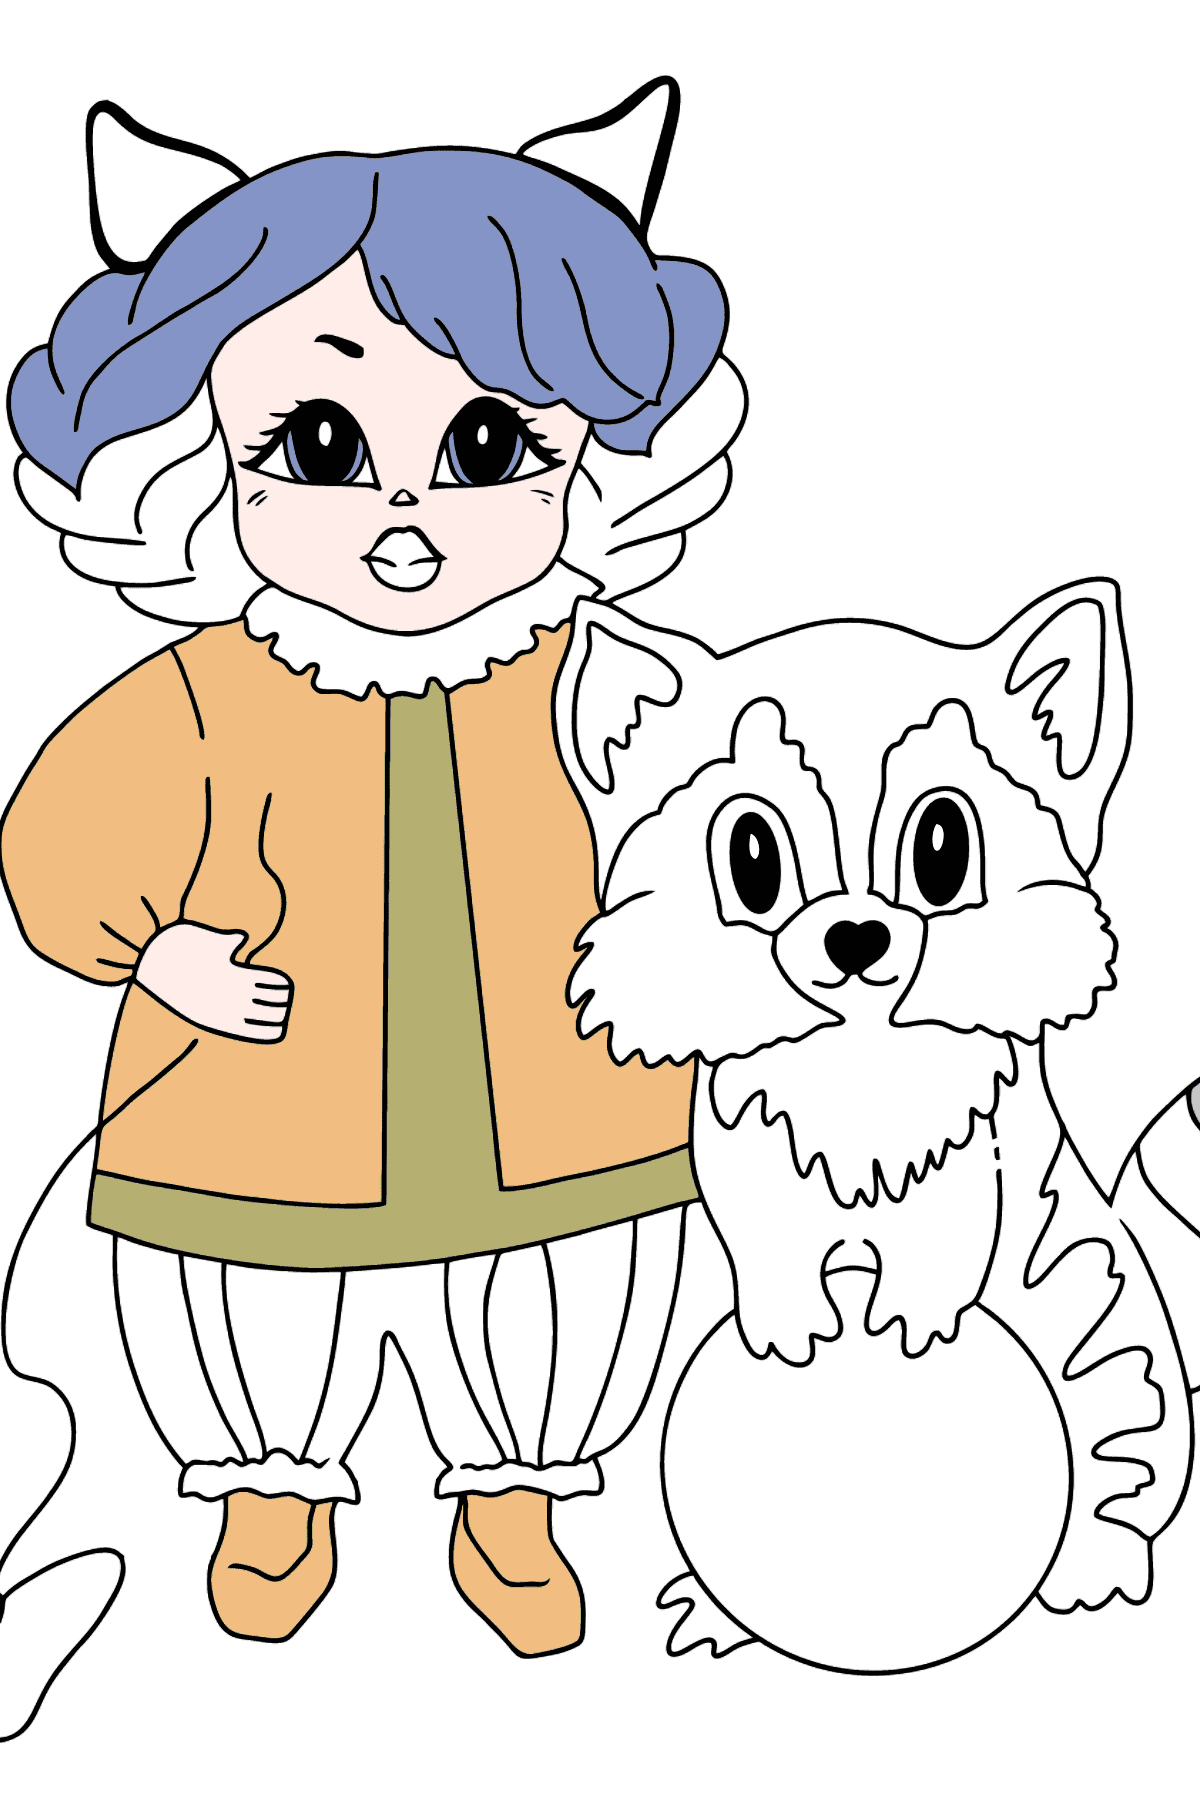 Princess and raccoon coloring page - Coloring Pages for Kids